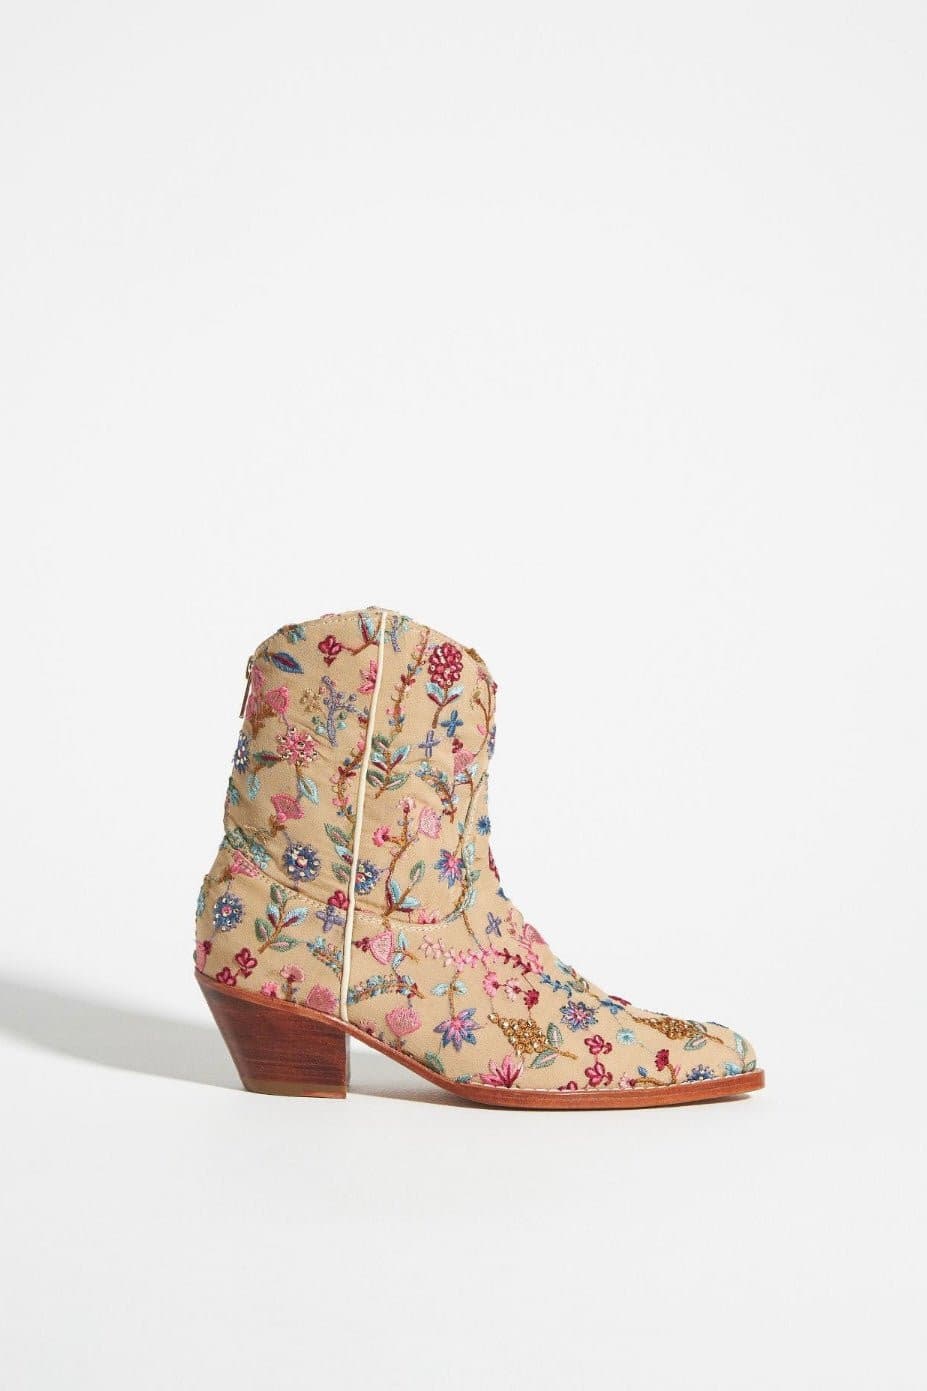 EMBROIDERED WESTERN BOOTS SUSAN X ANTHROPOLOGIE